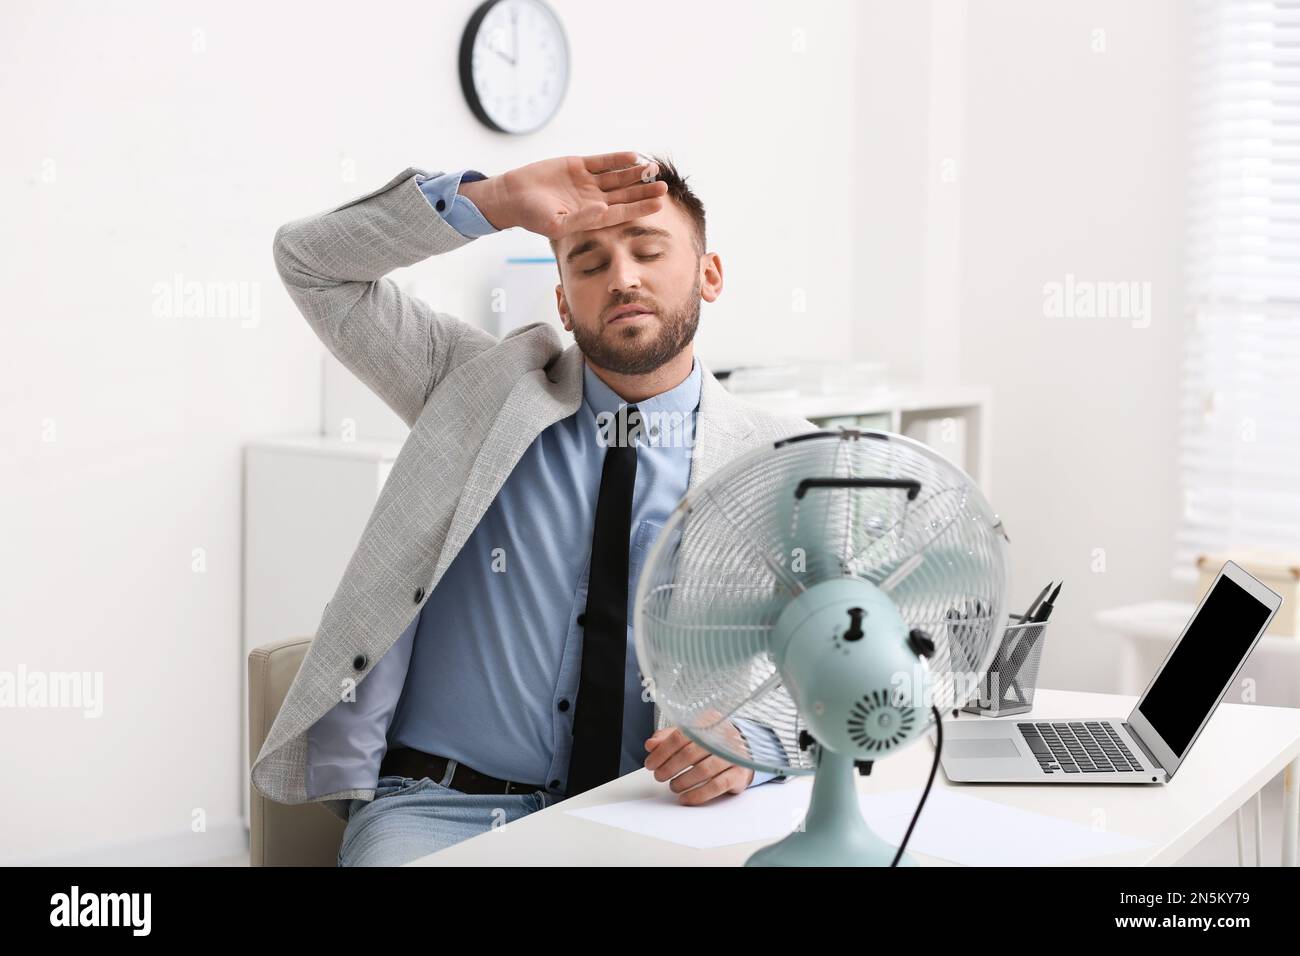 Man suffering from heat in front of fan at workplace Stock Photo